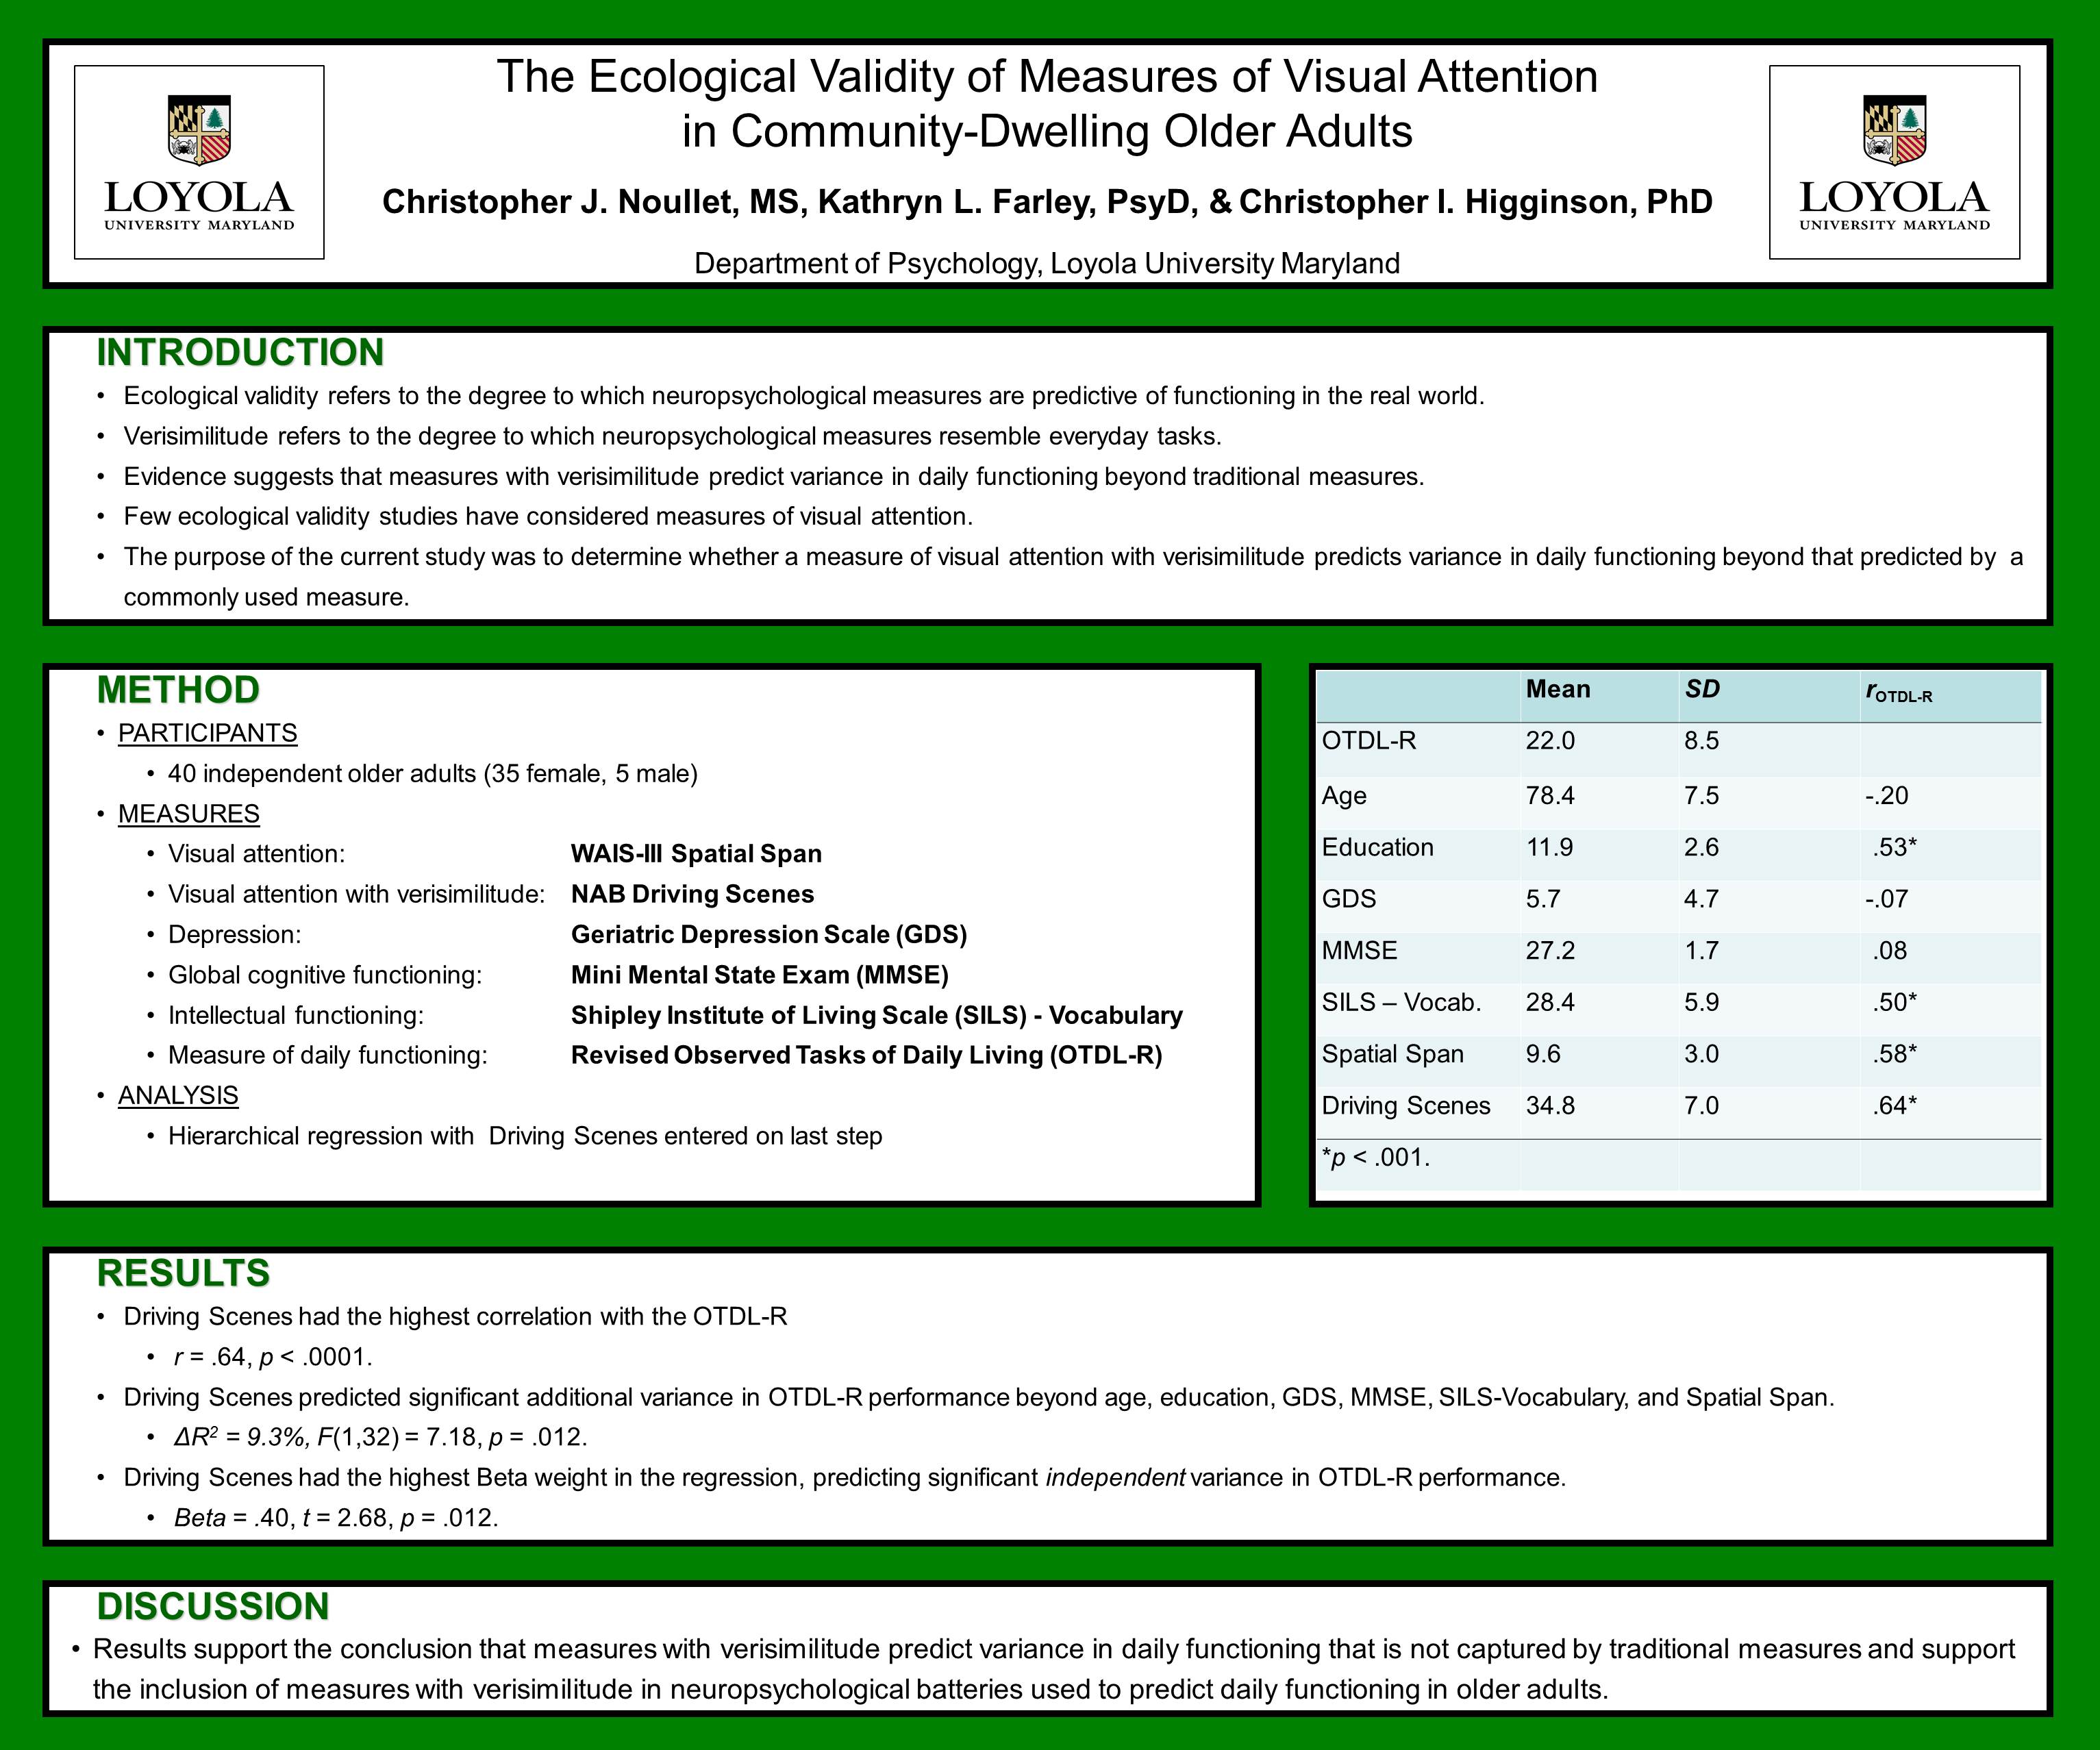 poster image: 'The Ecological Validity of Measures of Visual Attention in Community-Dwelling Older Adults'